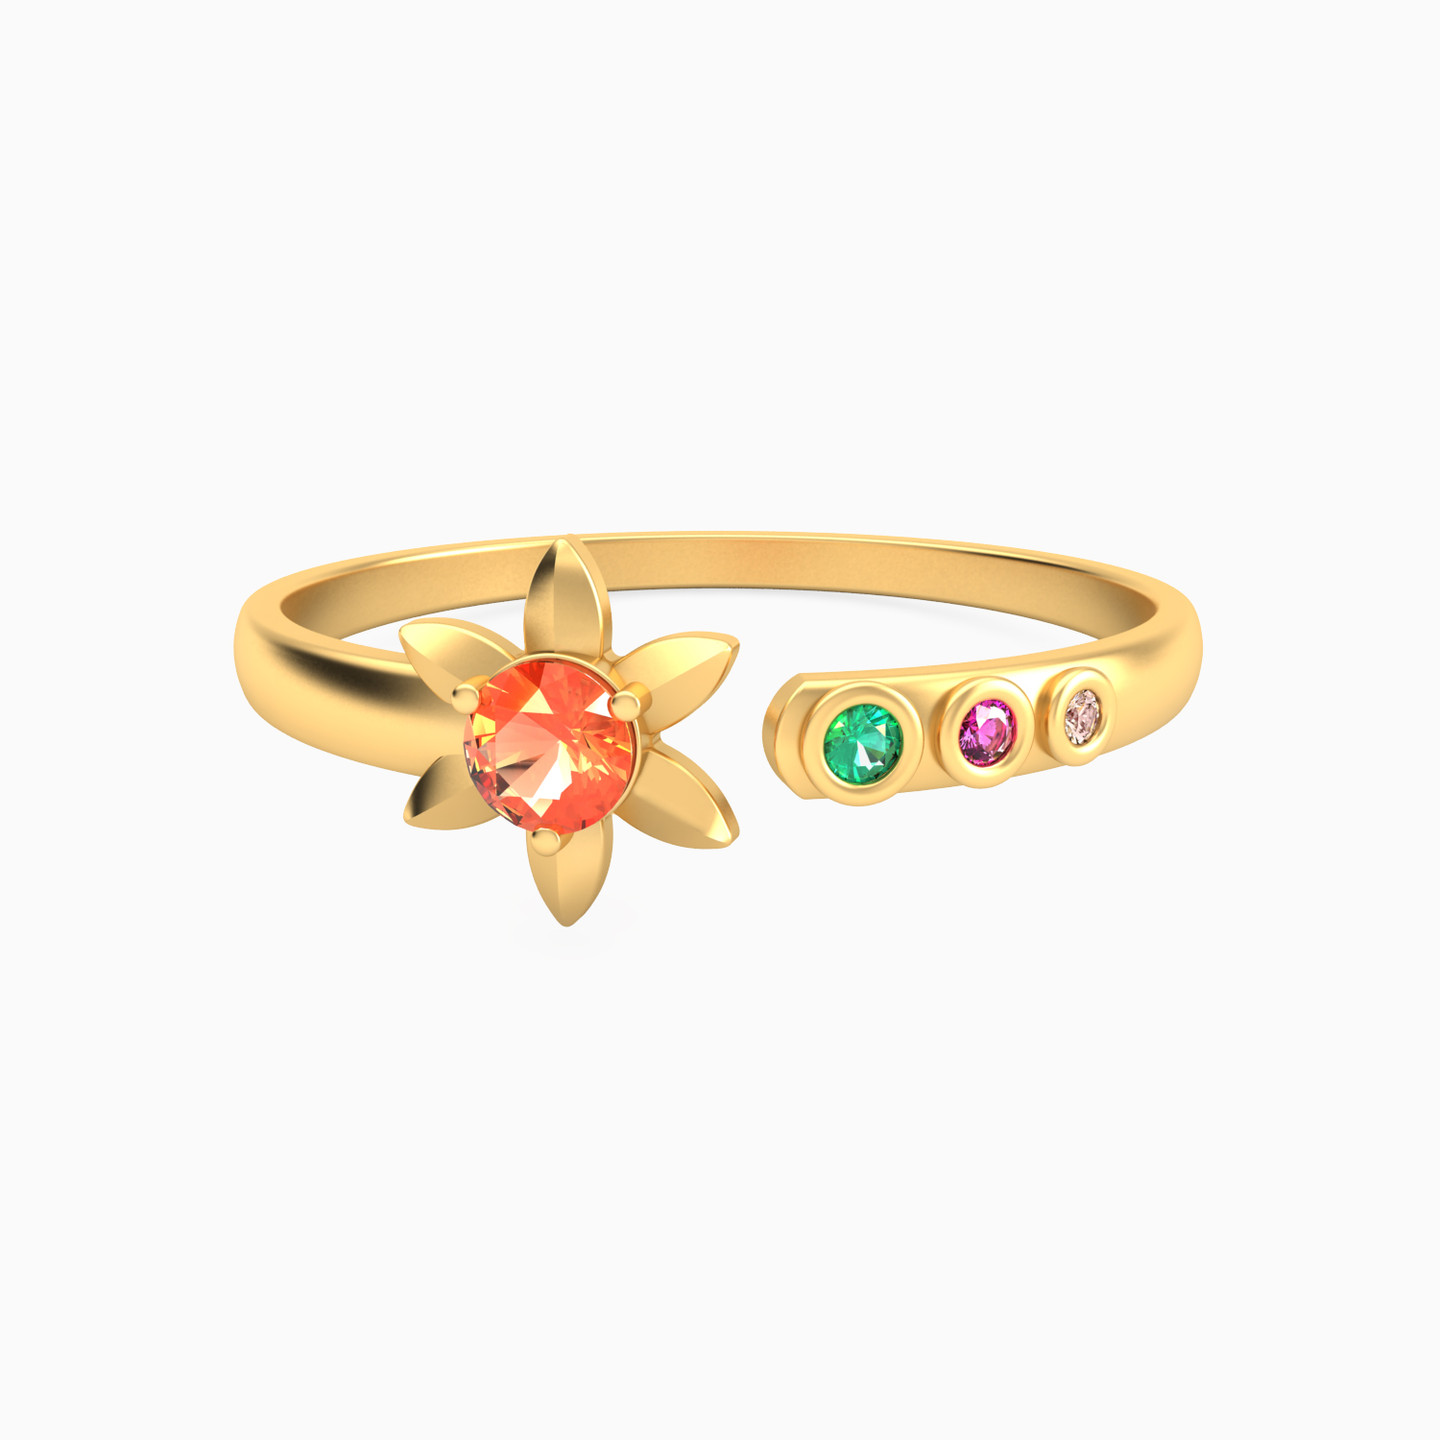 14K Gold Colored Stones Two-headed Ring